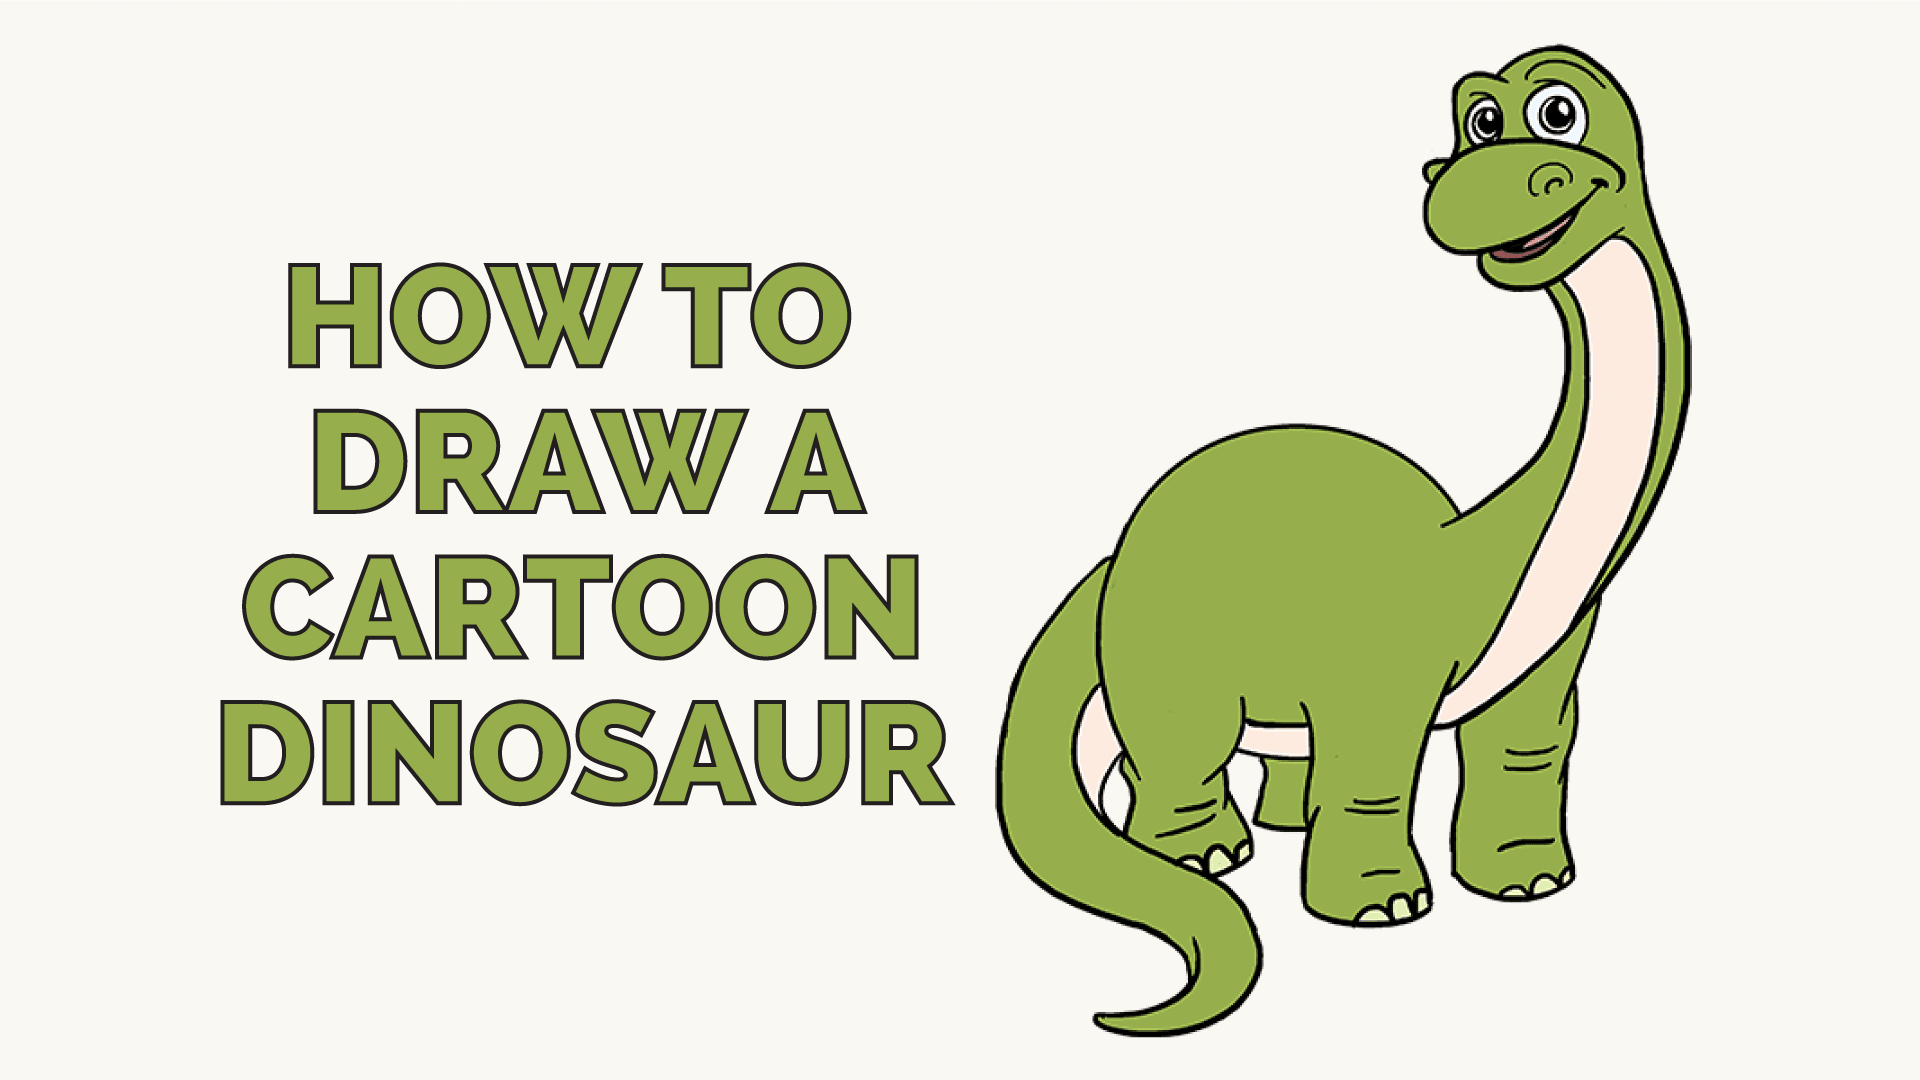 How to Draw a Cartoon Dinosaur | Easy Step-by-Step Drawing Guides